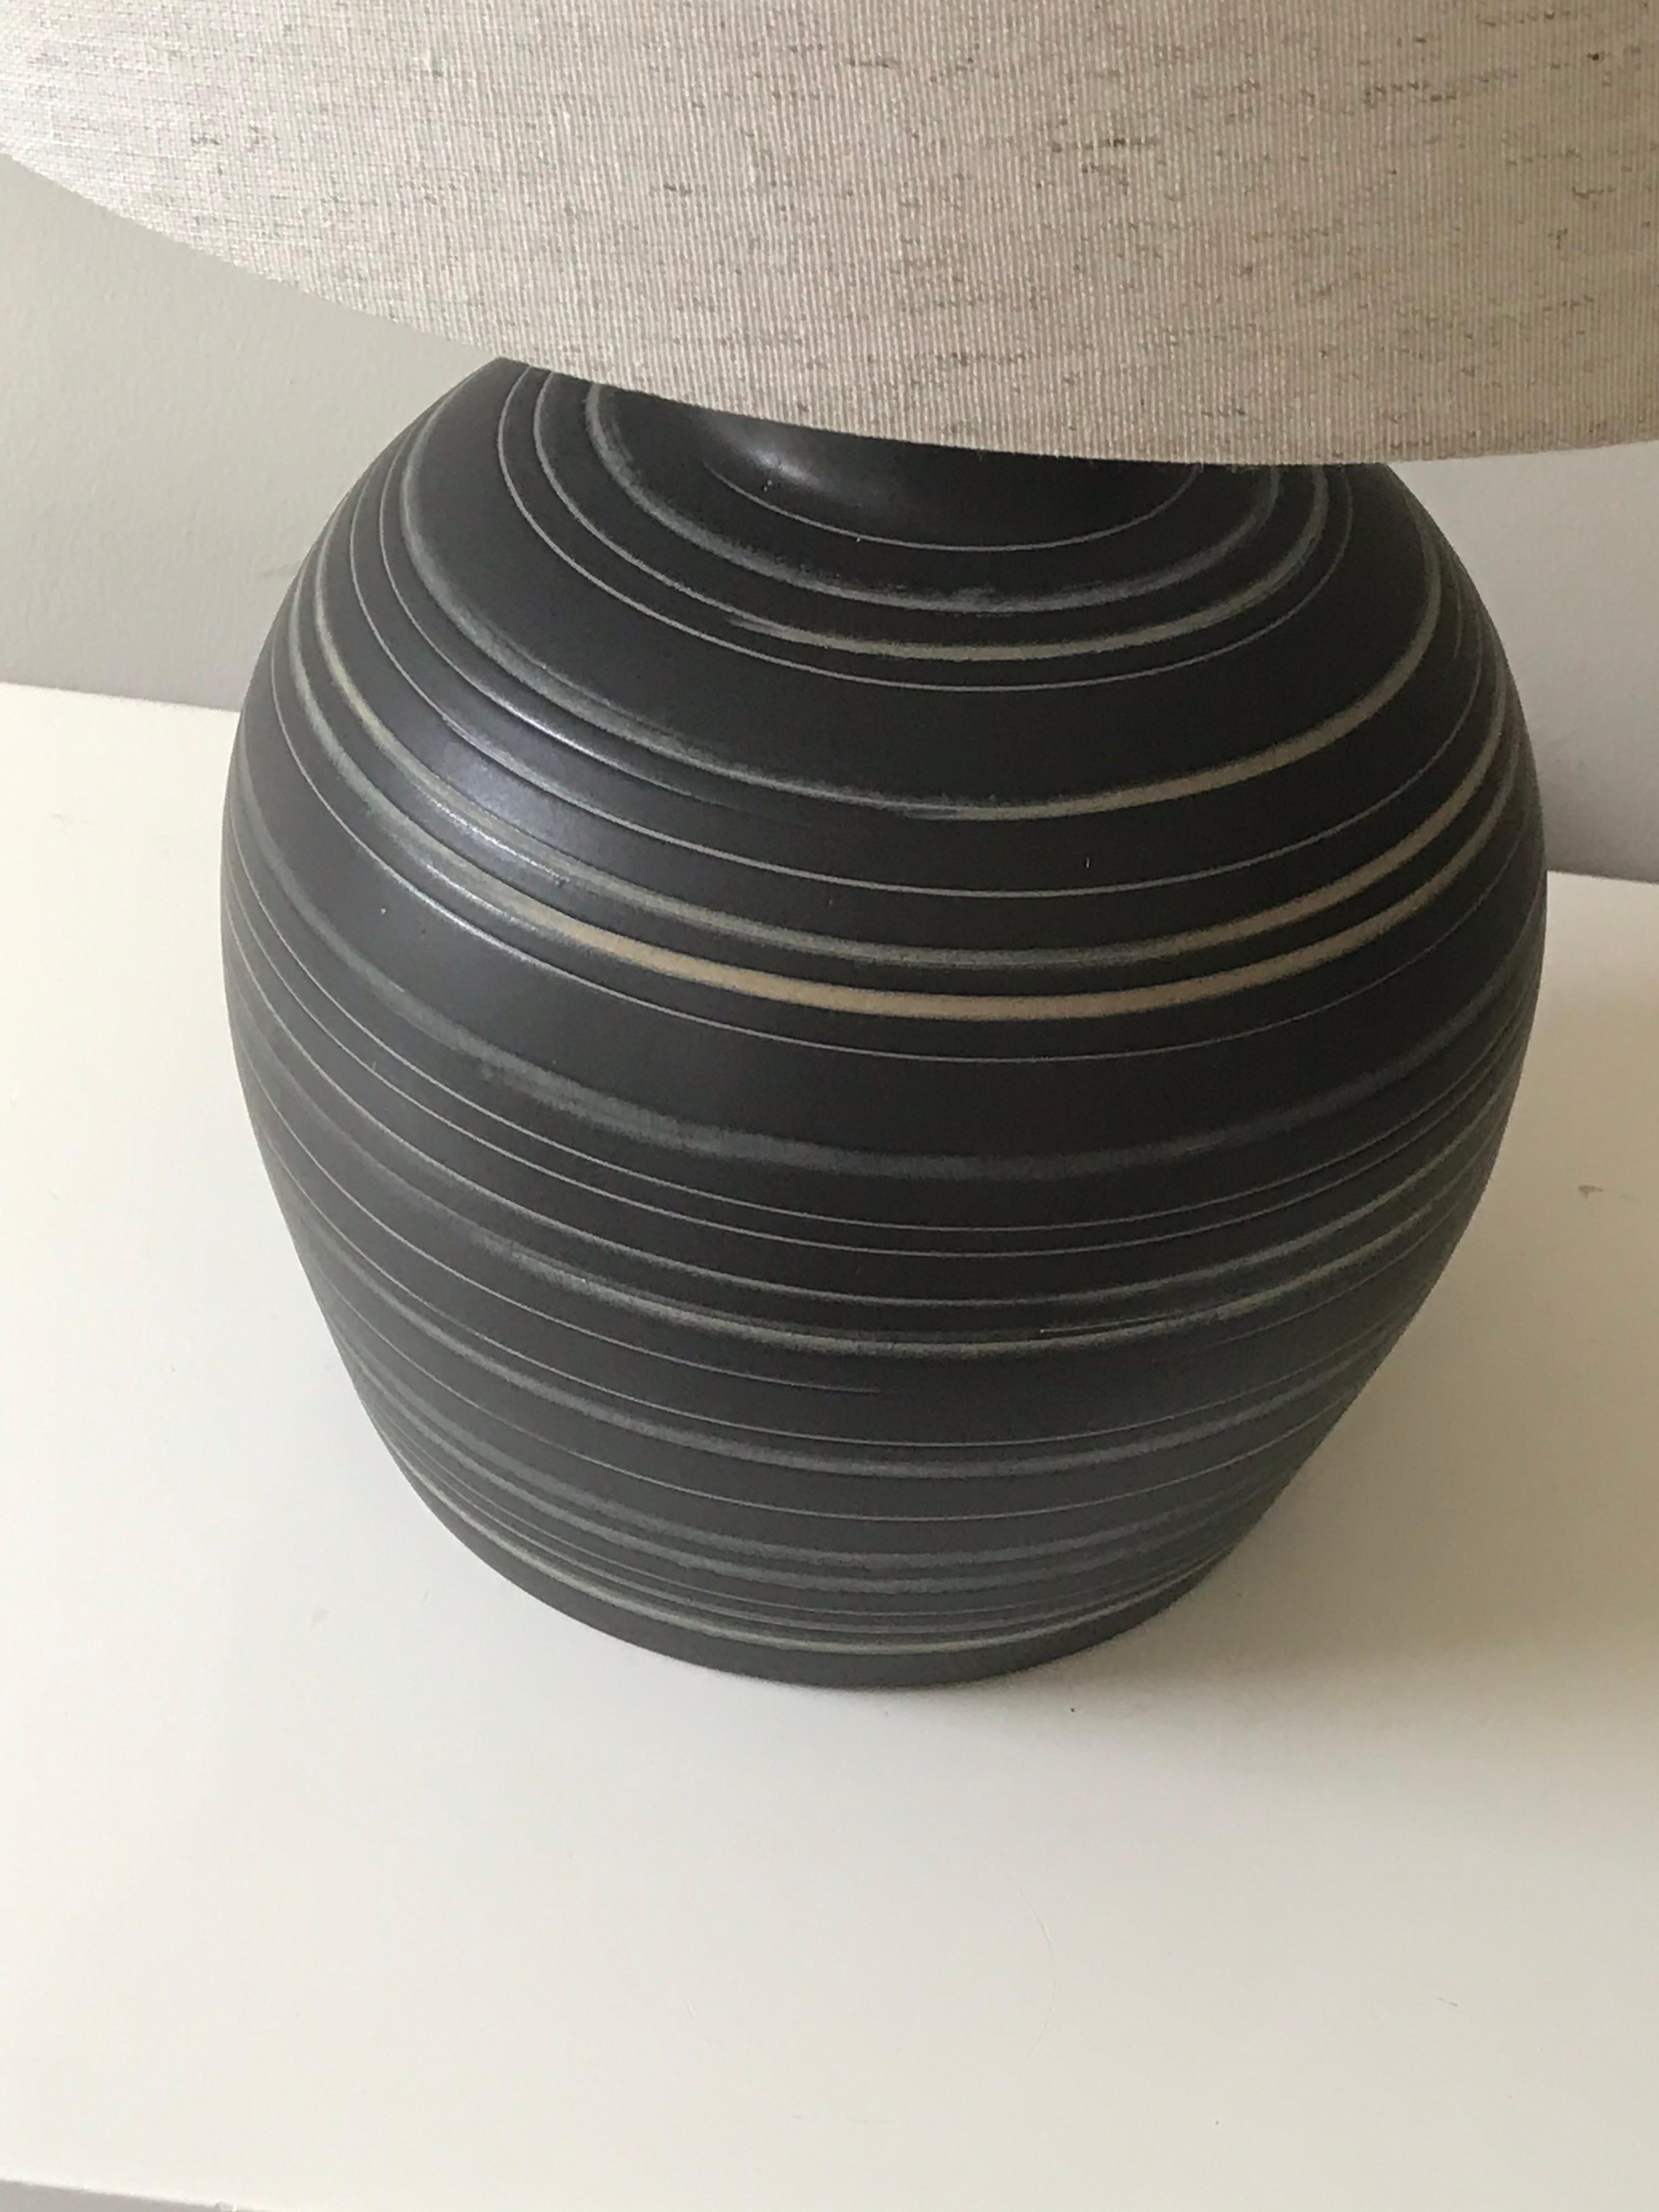 Elegant lamp by ceramicist duo Jane and Gordon Martz for Marshall Studios. Features an off black/ dark grey back with cream and light blue swirls. Newer wiring and new shade.

Overall- 
23.5